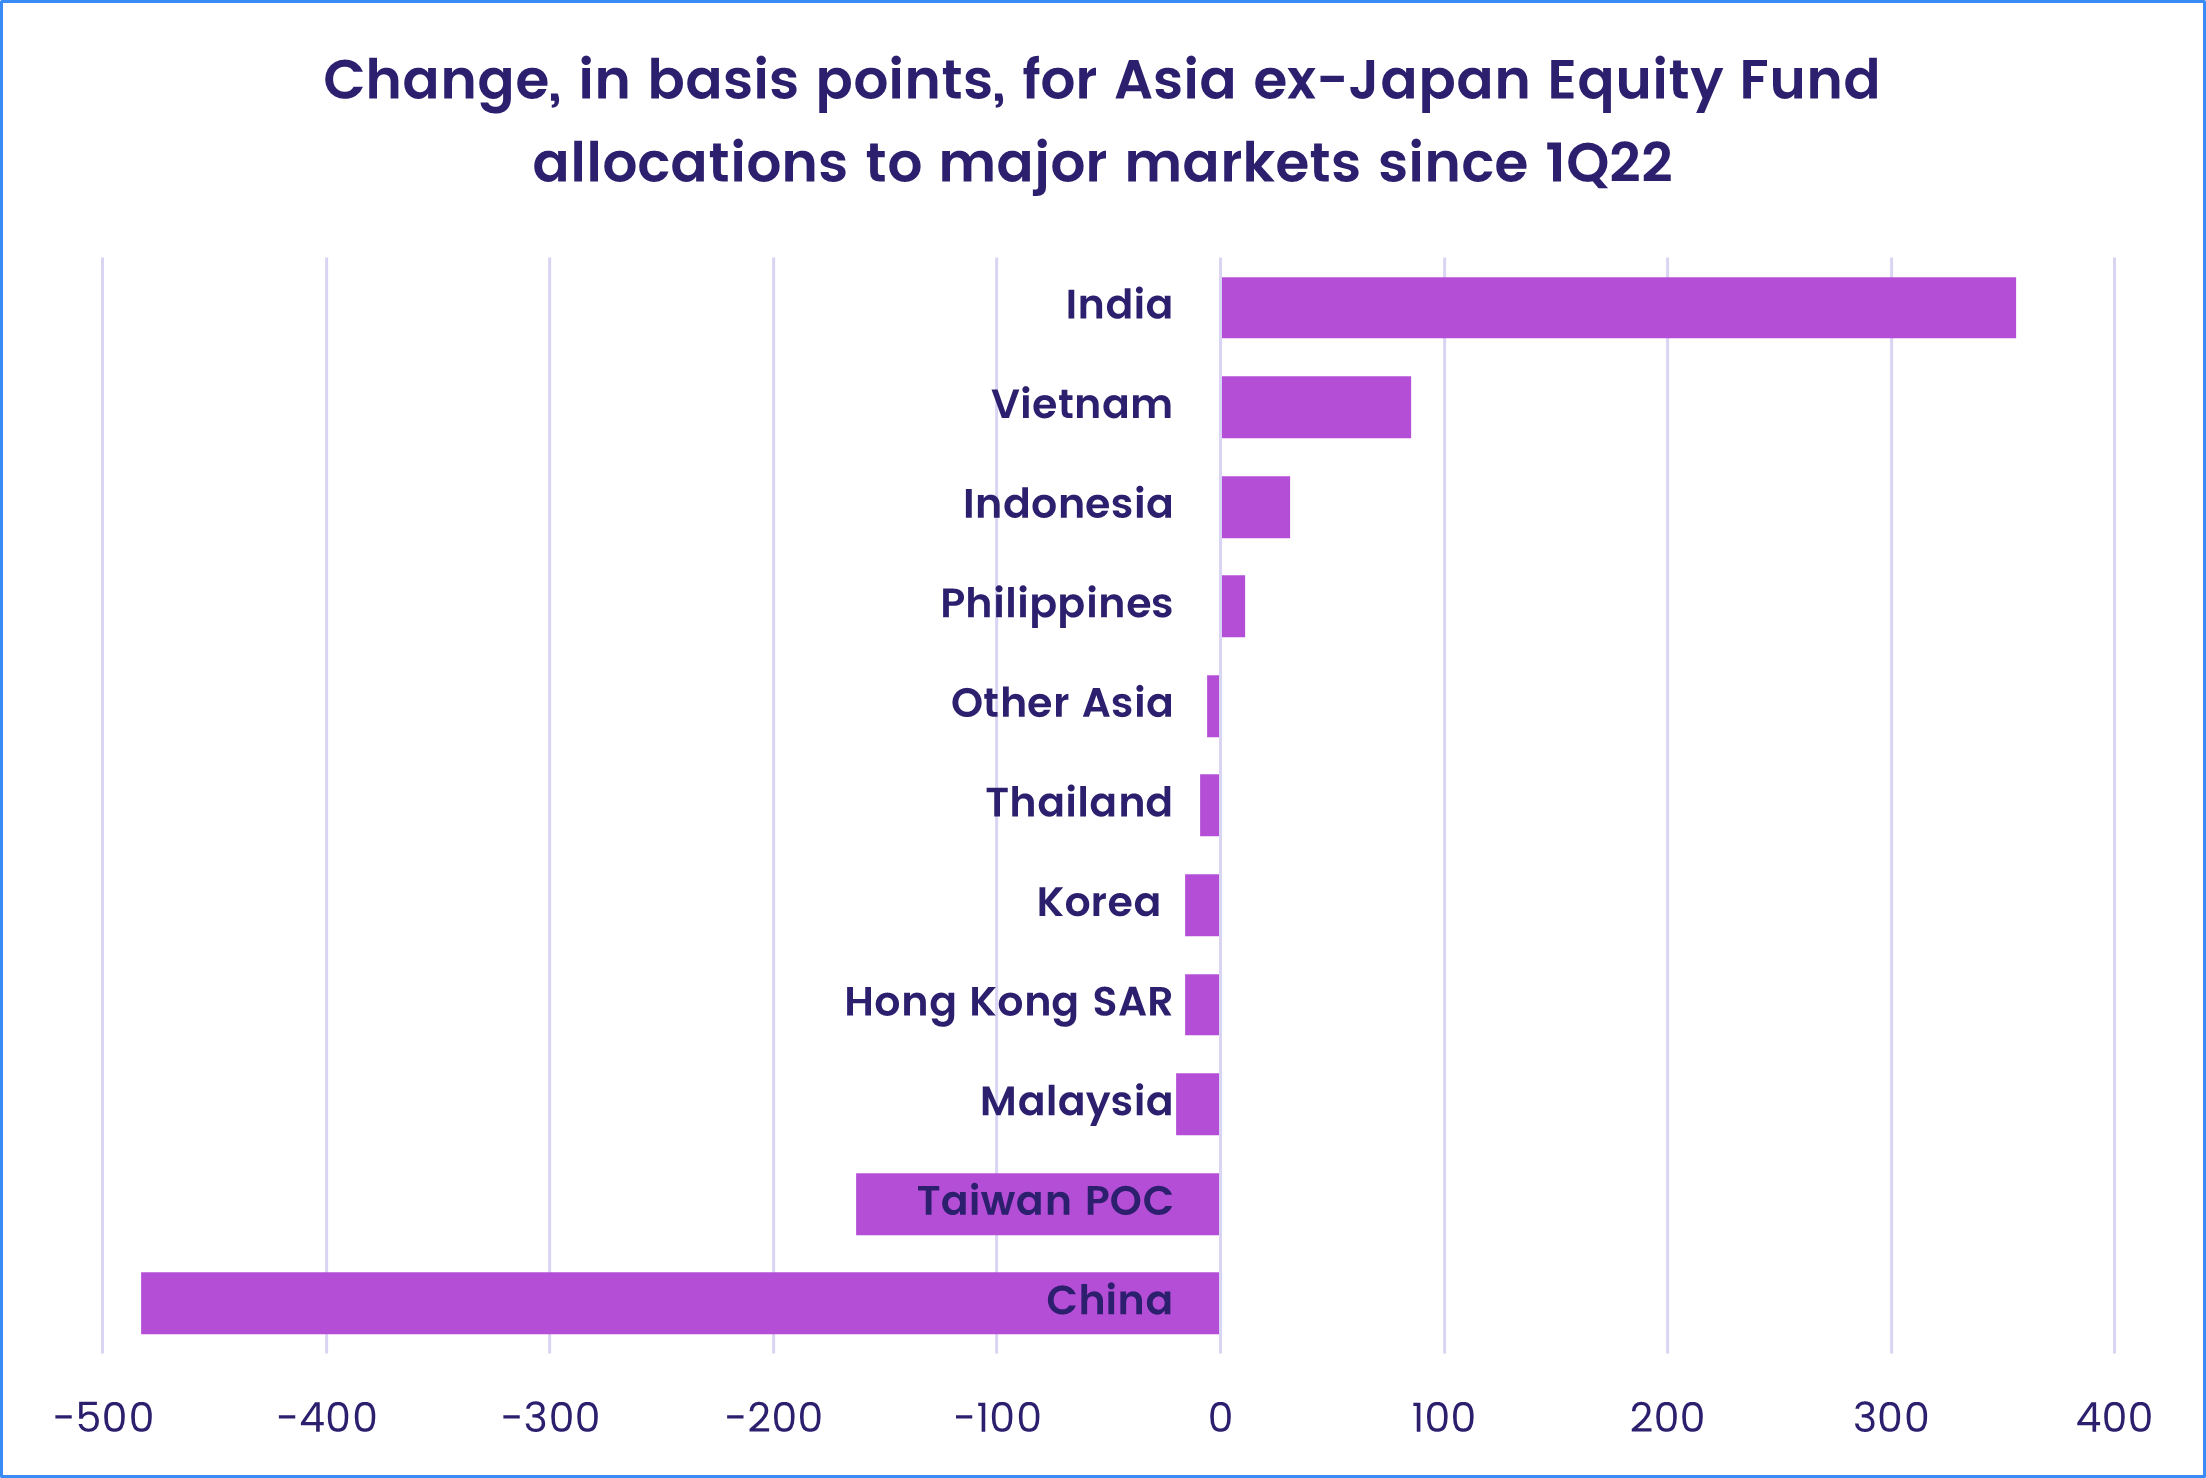 Image of a chart representing "Change, in basis points, for Asia ex-Japan Equity Fund allocations to major markets since 1Q22"